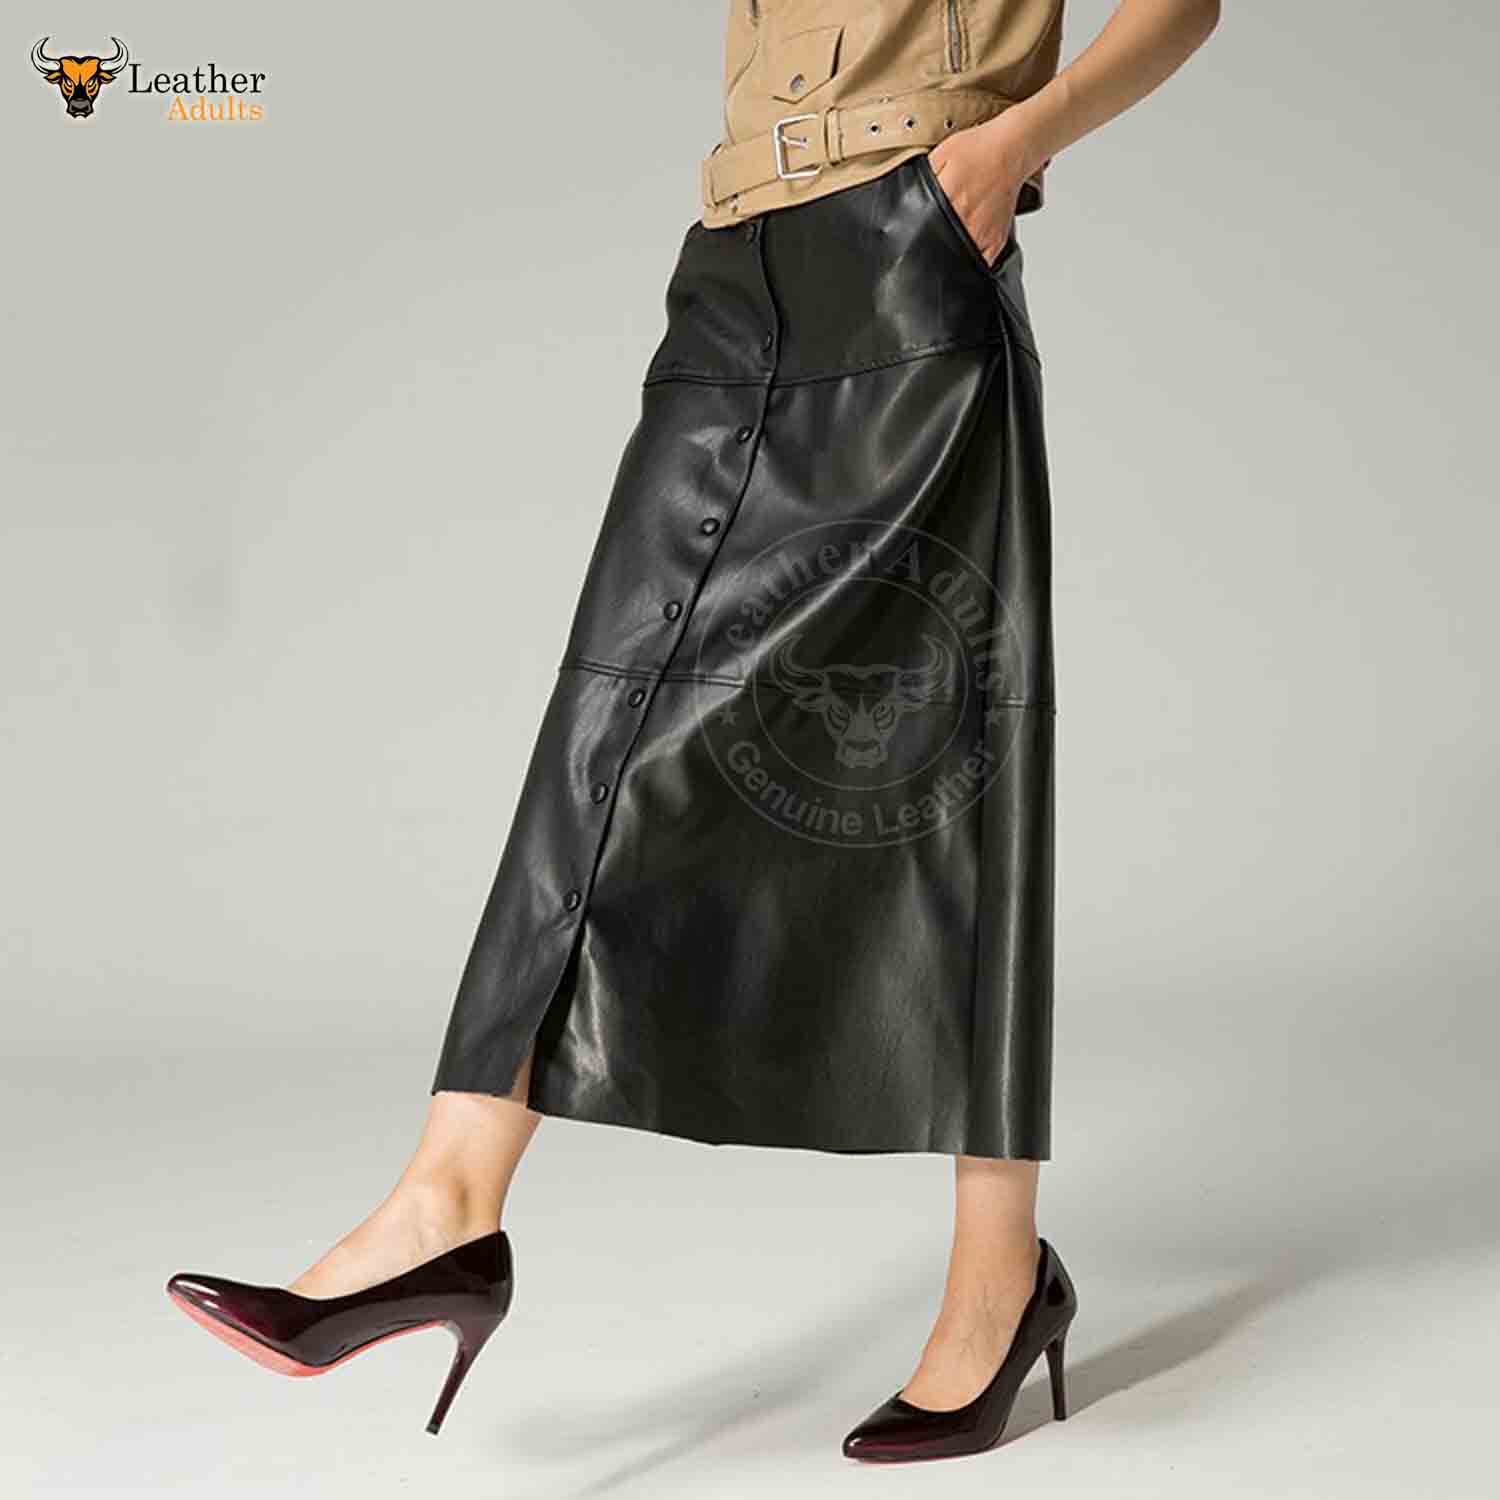 DROMe Leather Midi Skirt in Black Womens Clothing Skirts Mid-length skirts 